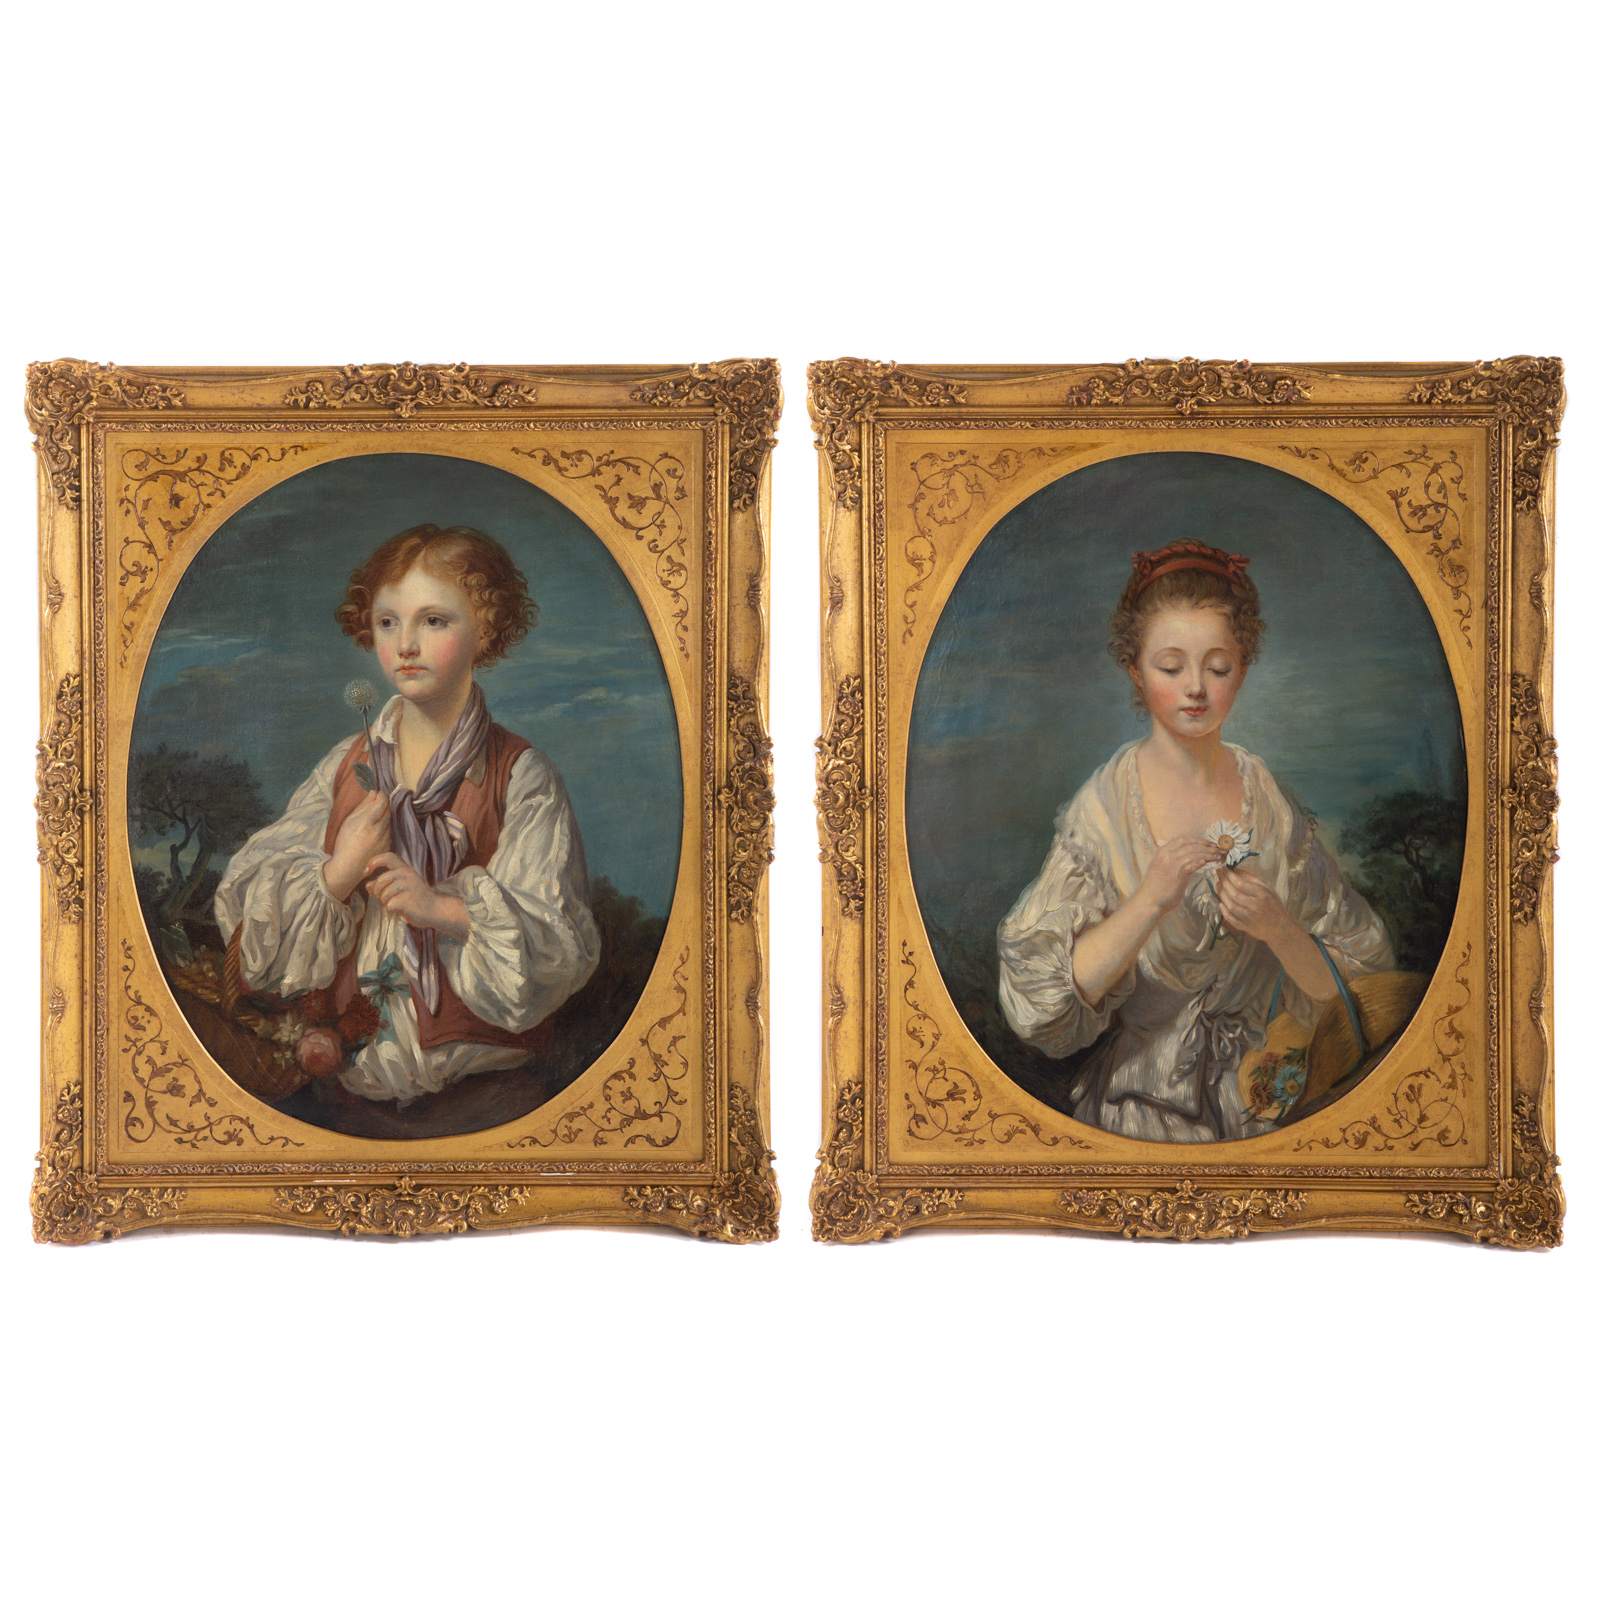 FRENCH SCHOOL, 18TH C., PAIR OF